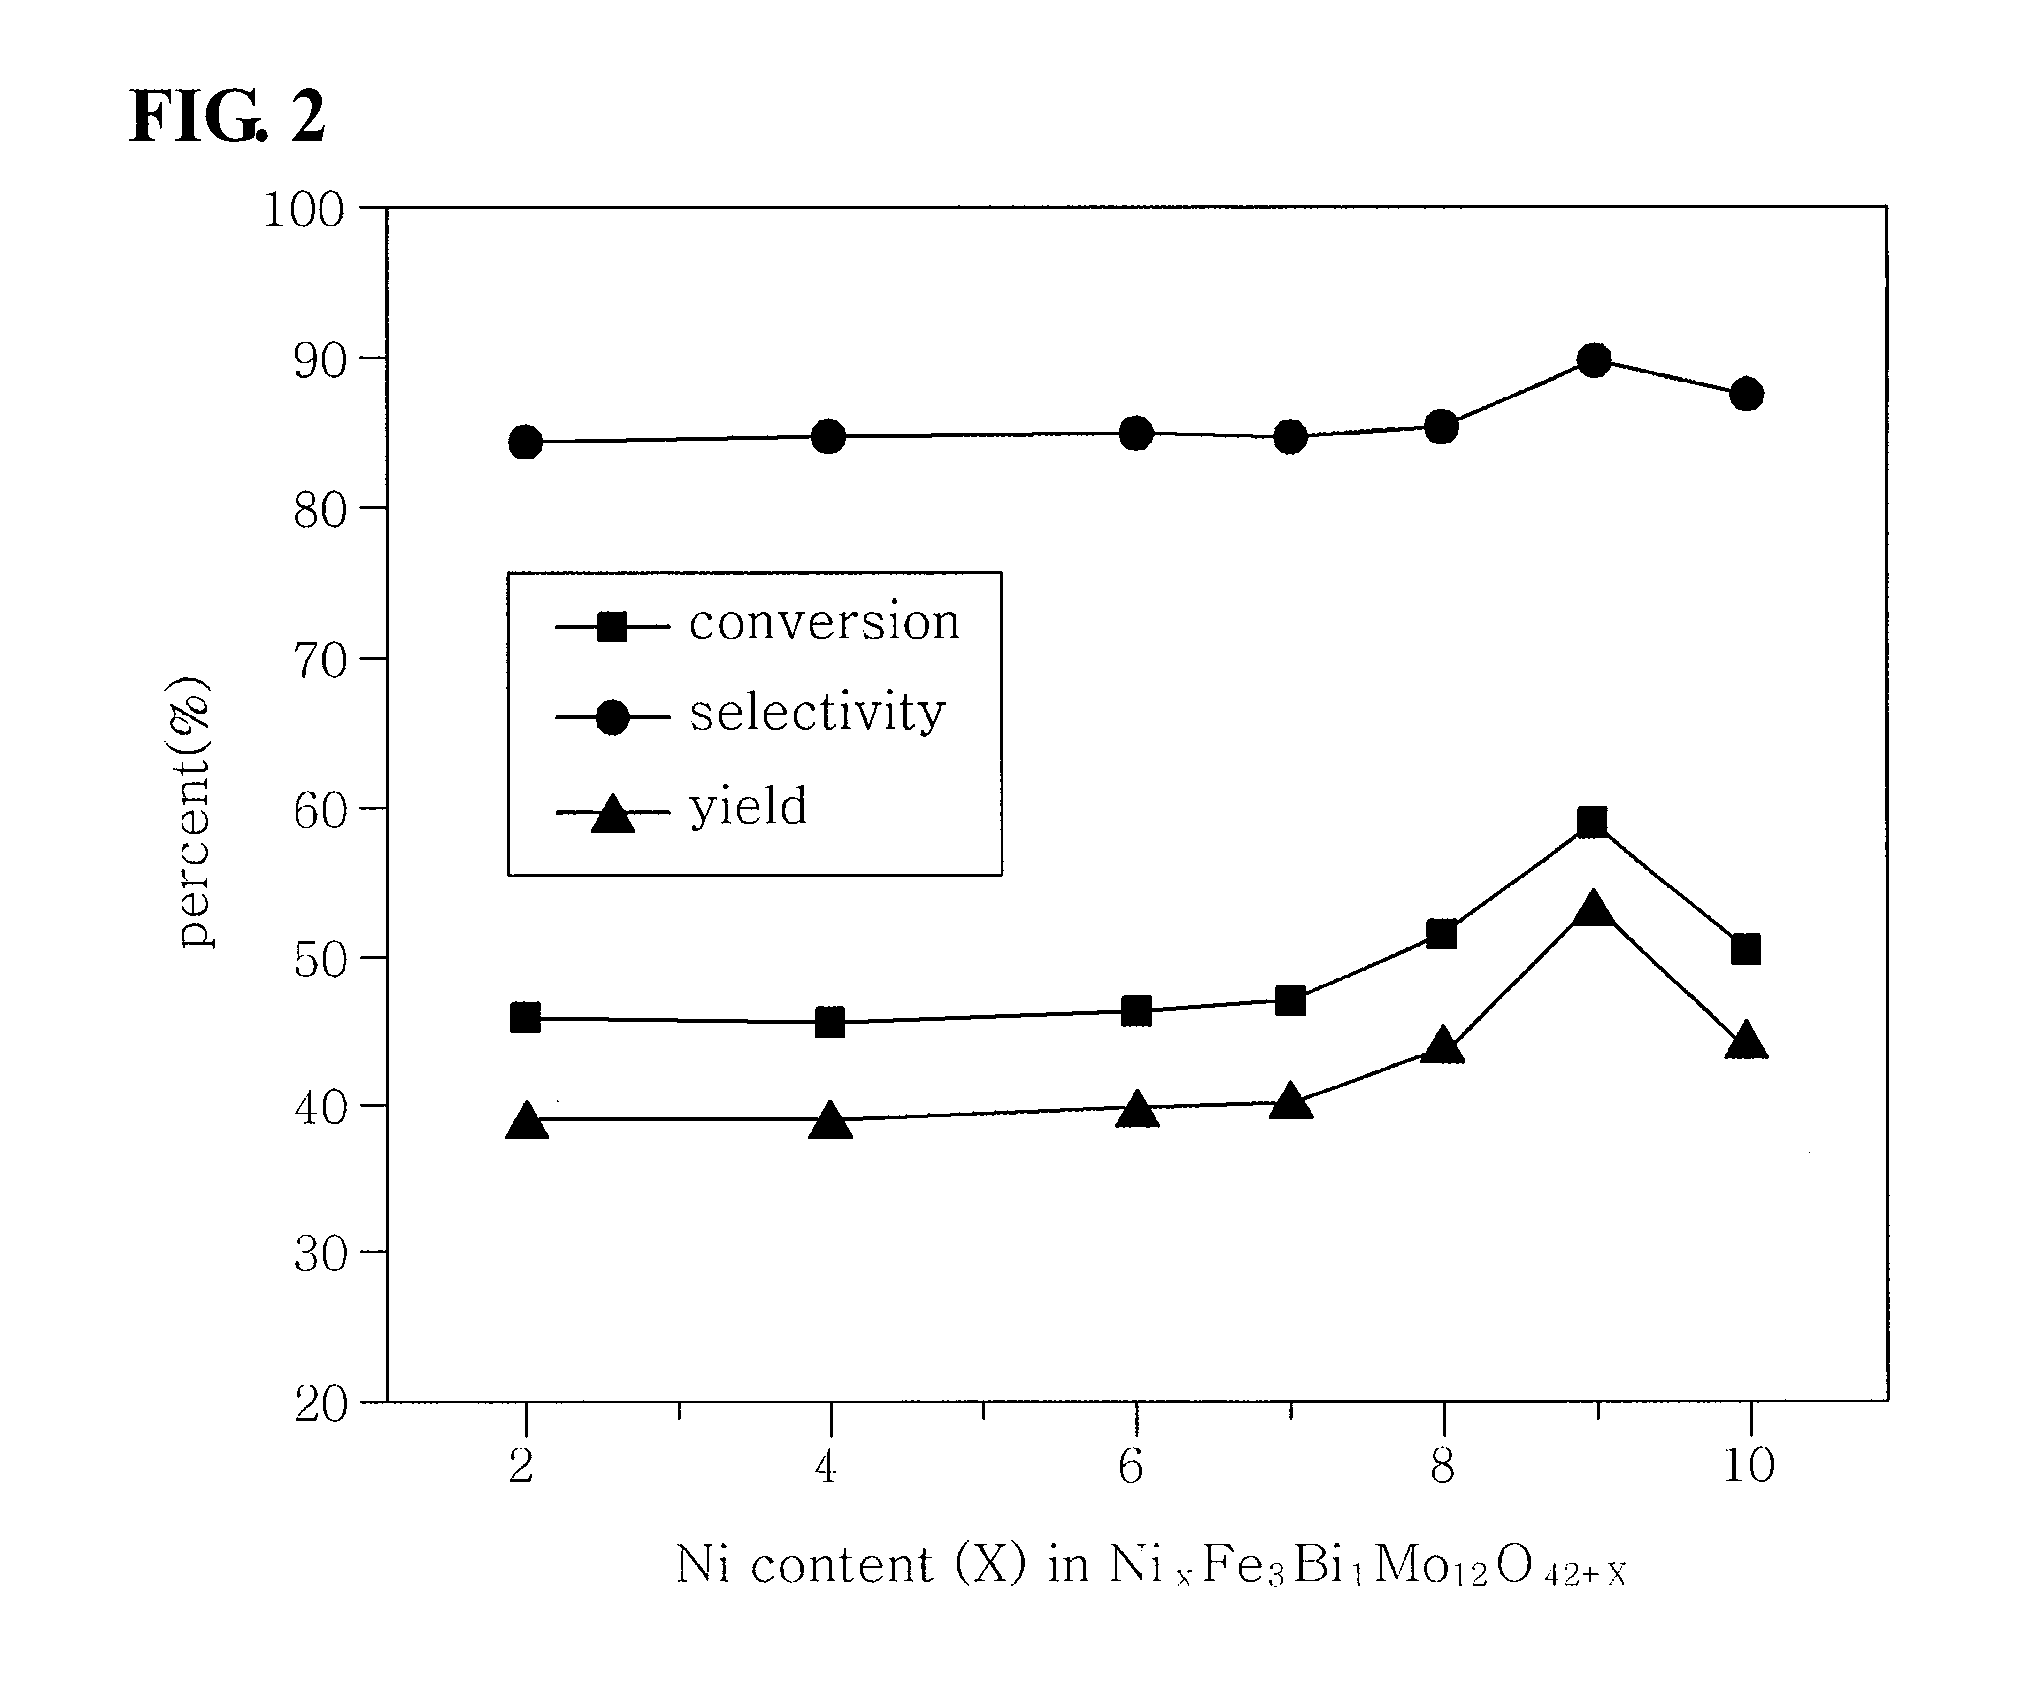 Method of preparing multicomponent bismuth molybdate catalysts comprising four metal components and method of preparing 1,3-butadiene using said catalysts